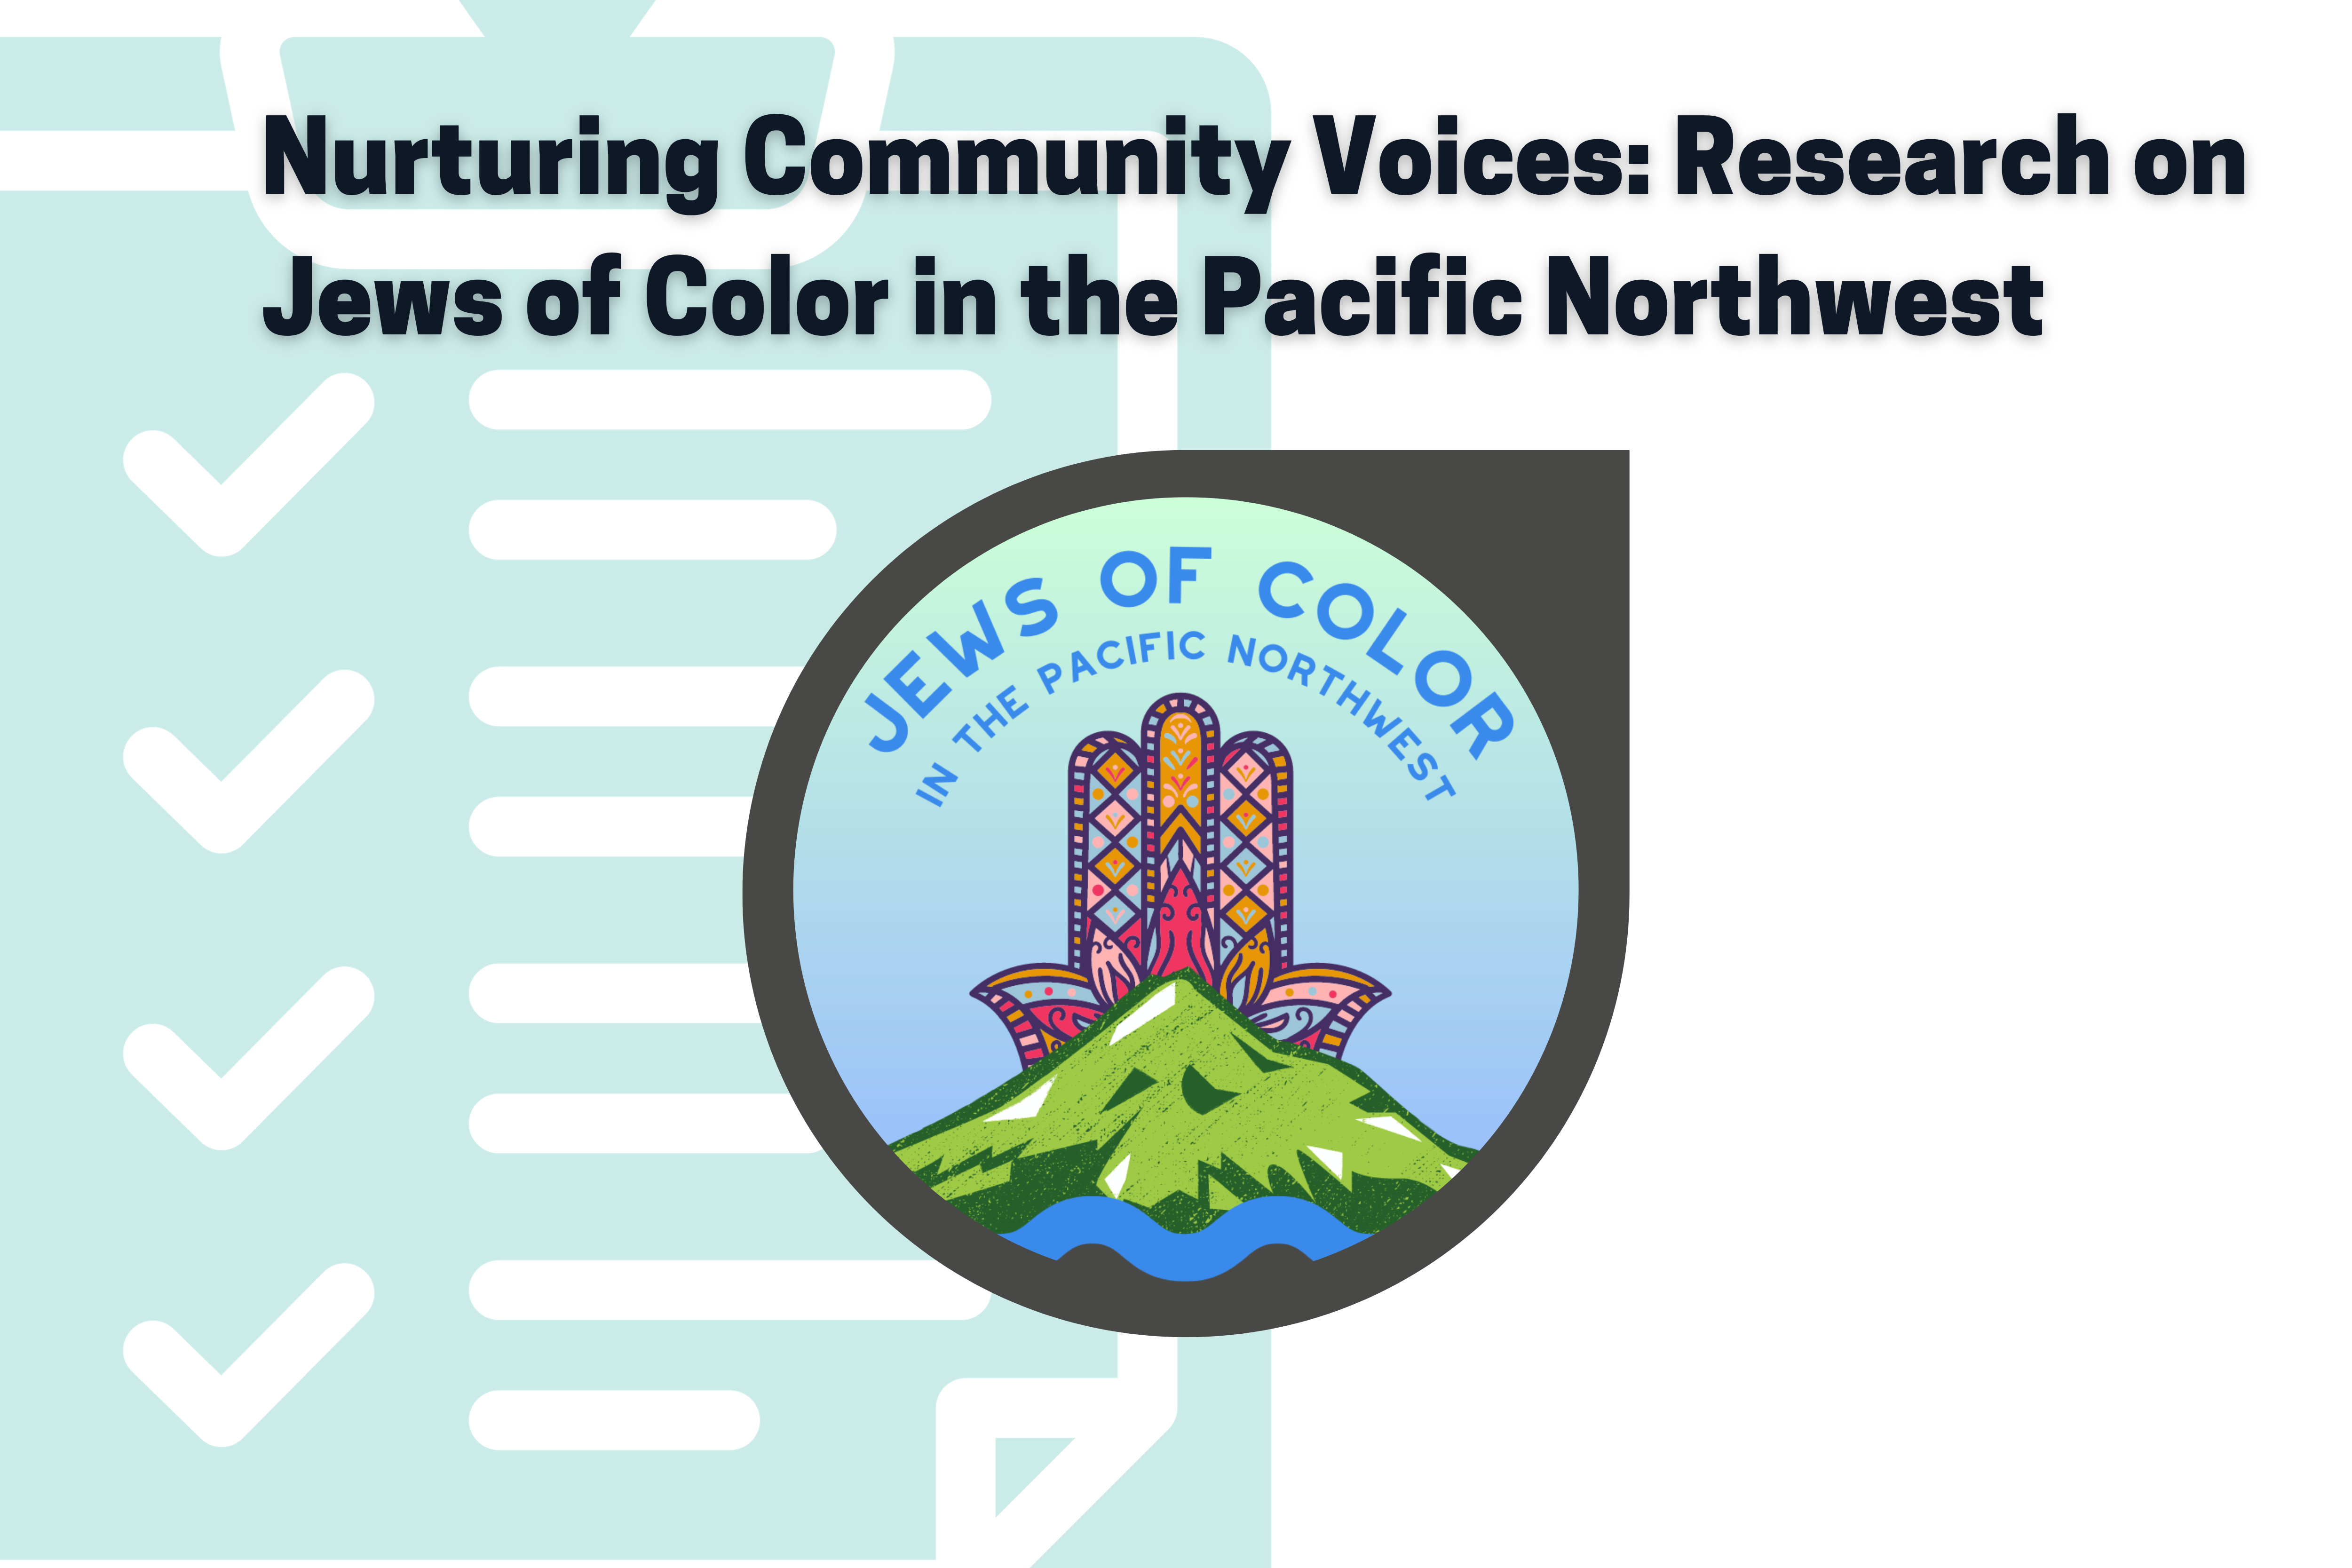 Nurturing Community Voices: Research on Jews of Color in the Pacific Northwest